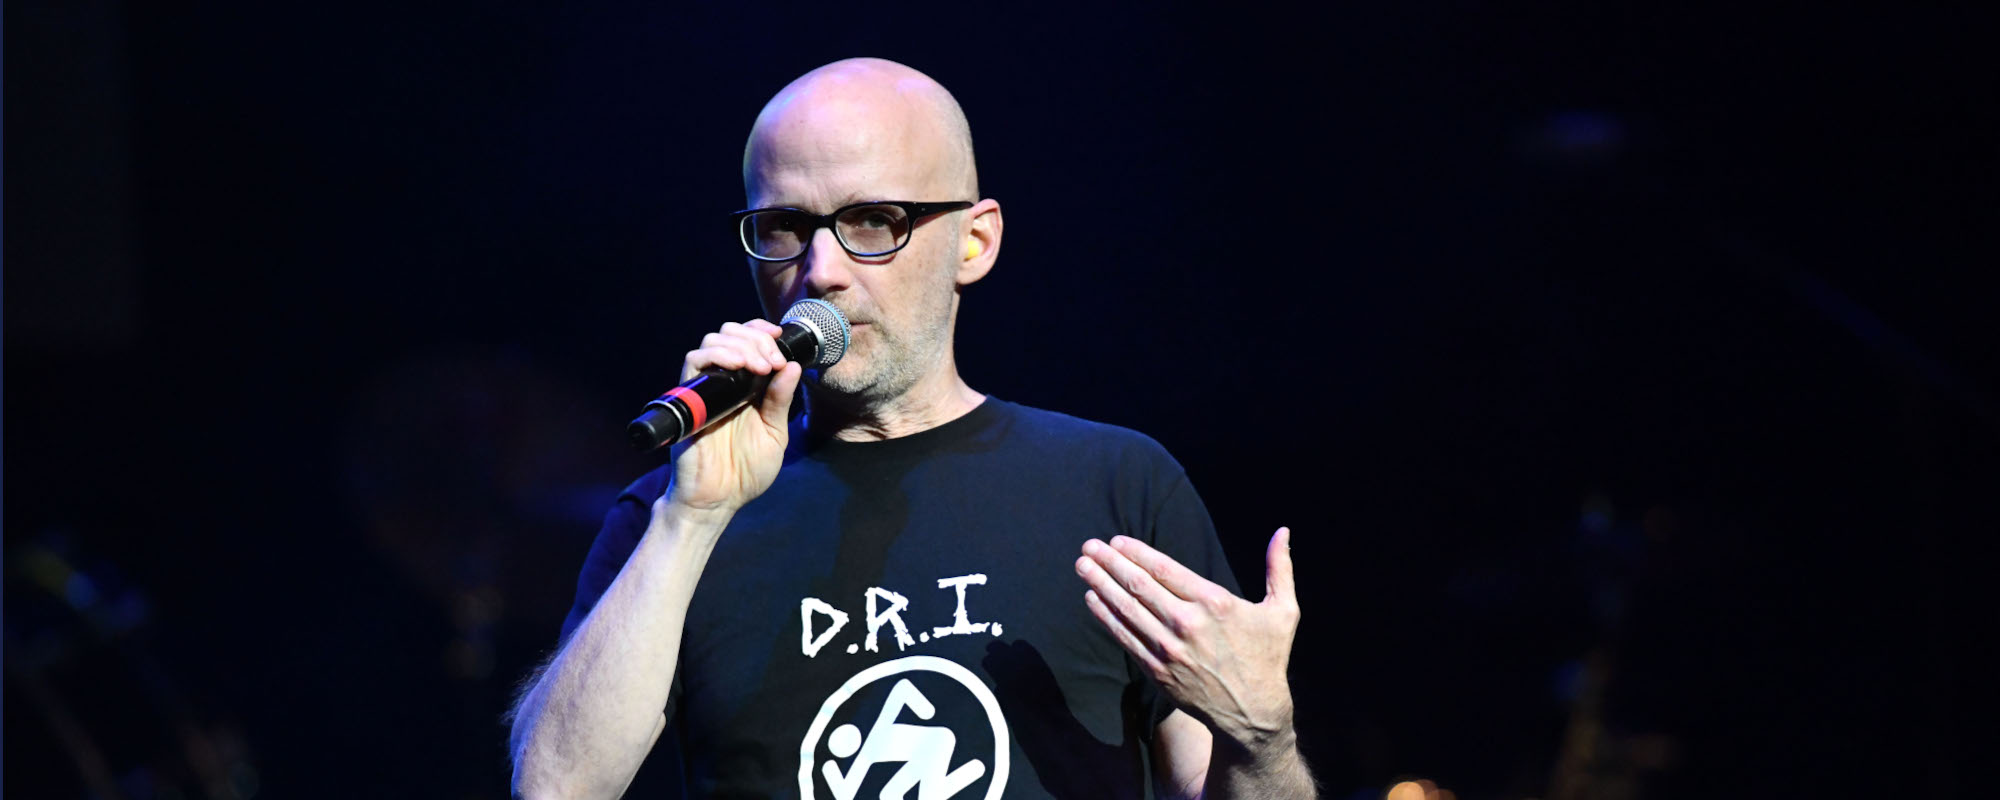 New Song Saturday! Hear New Tracks From Moby, Death Cab for Cutie, The Black Tones and More